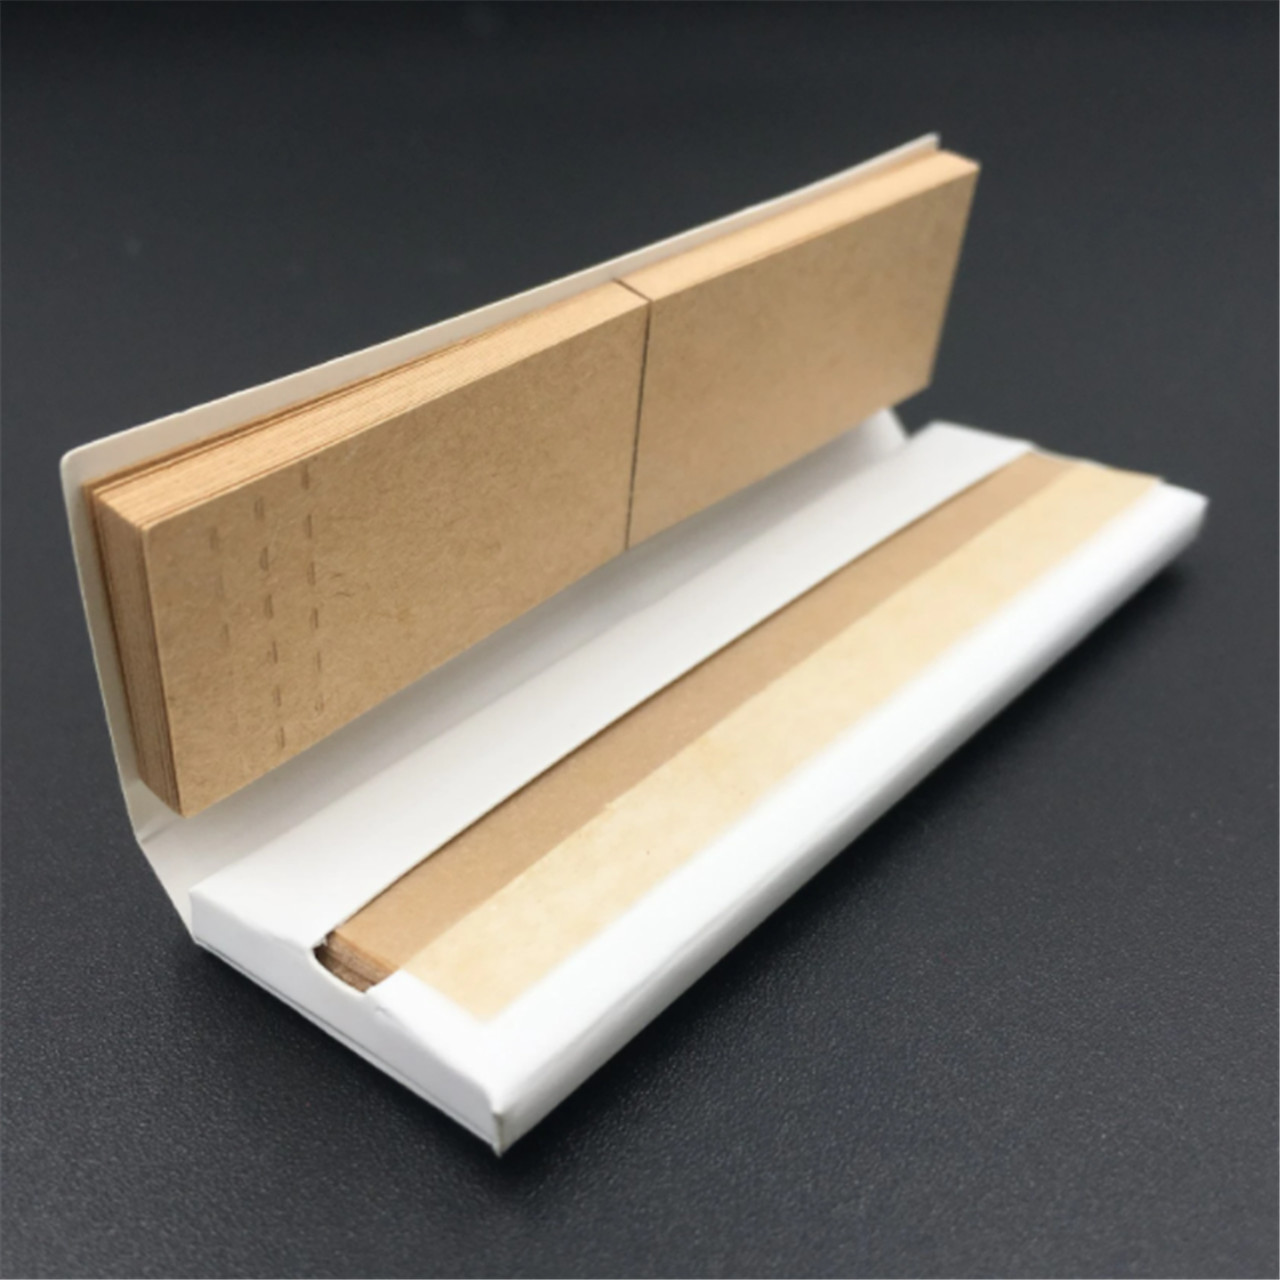 Low price for Baking Paper Roll - Custom design natural paper cigarette smoking rolling paper 2021 with custom logo – Spring Package